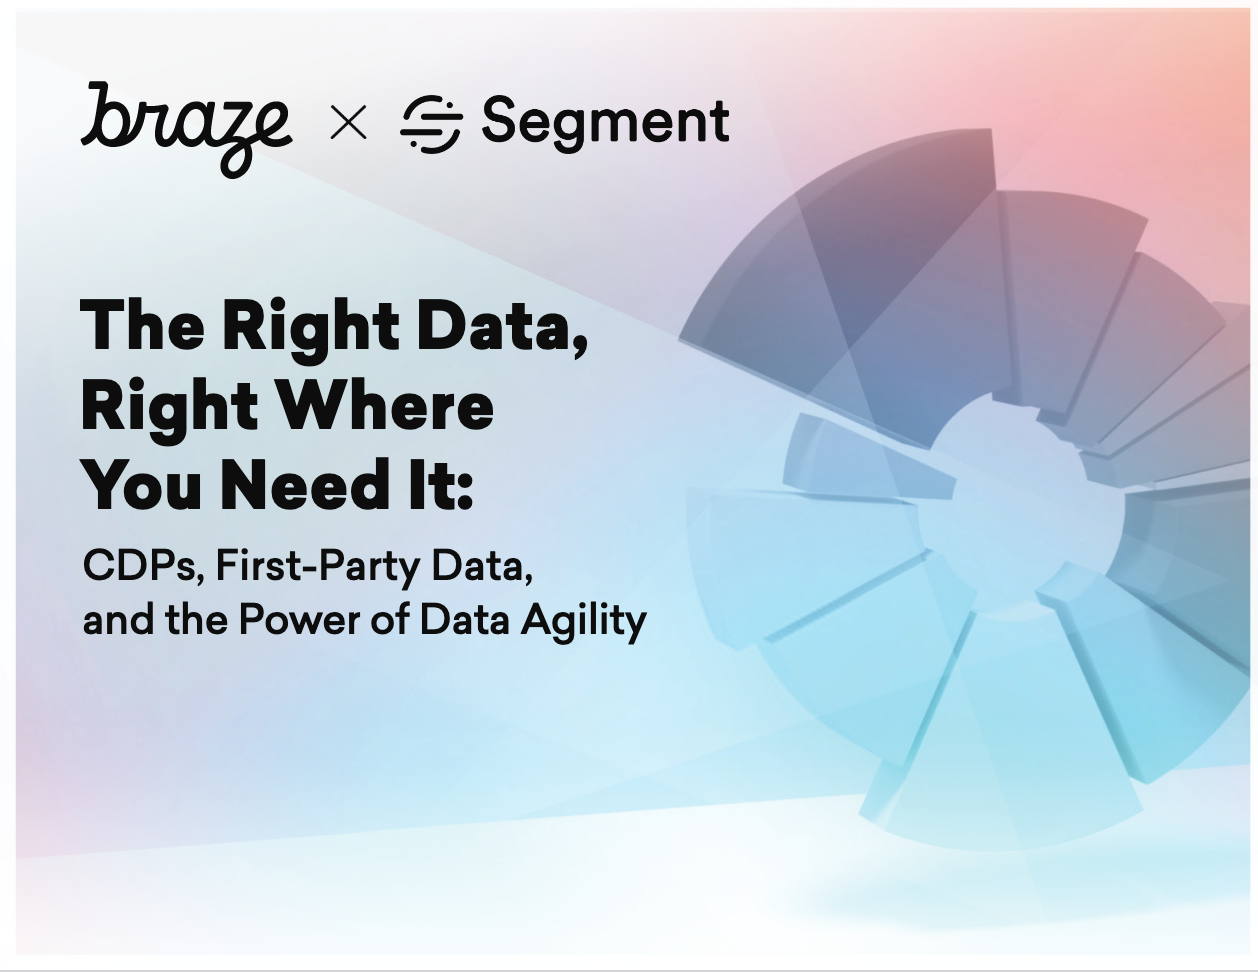 segment guide - The Right Data, Right Where You Need it: CDPs, First-Party Data, and the Power of Data Agility